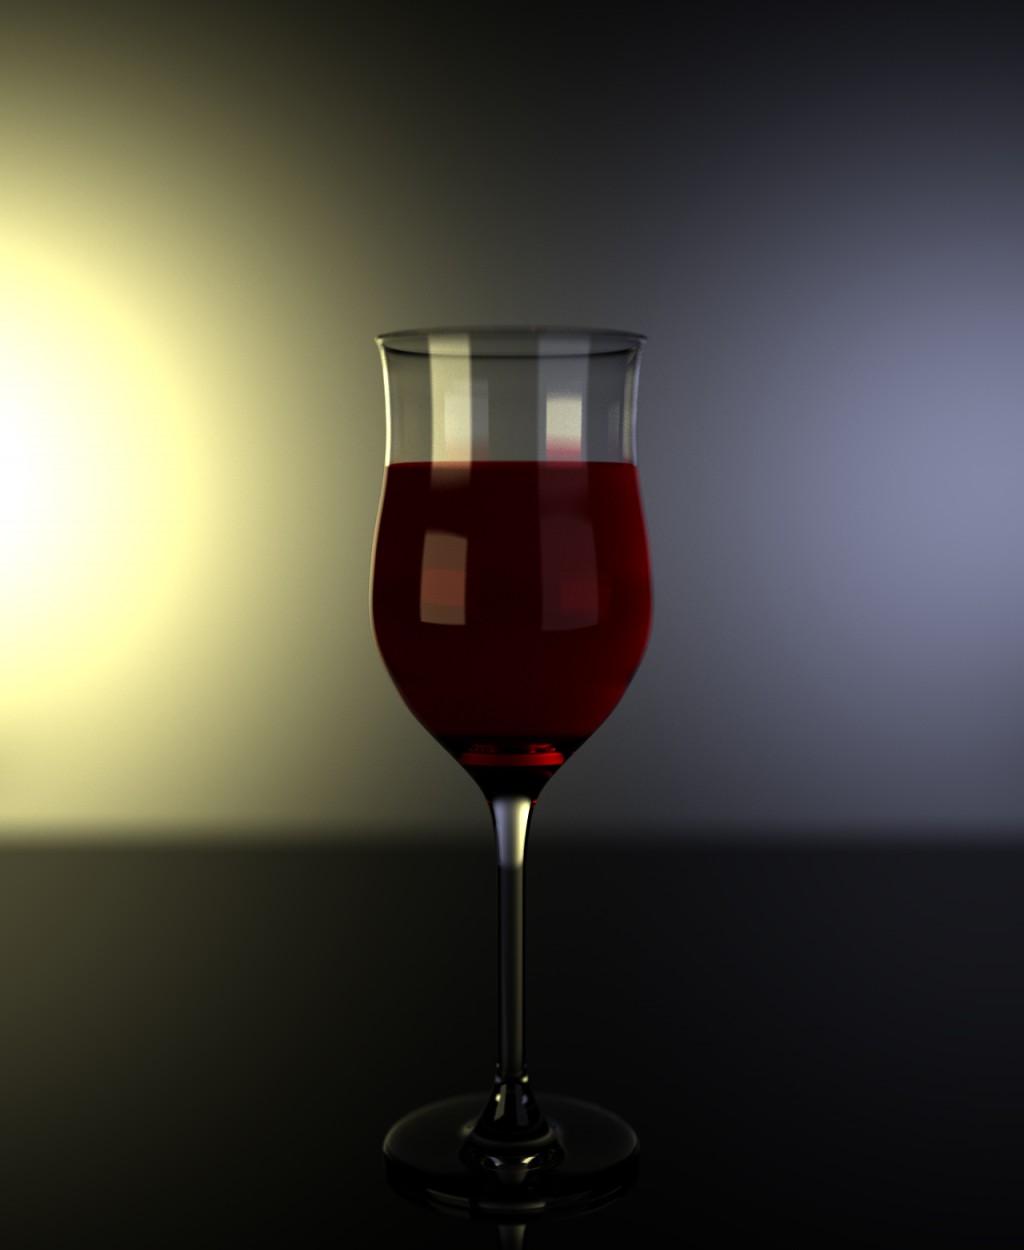 Drink at night preview image 1